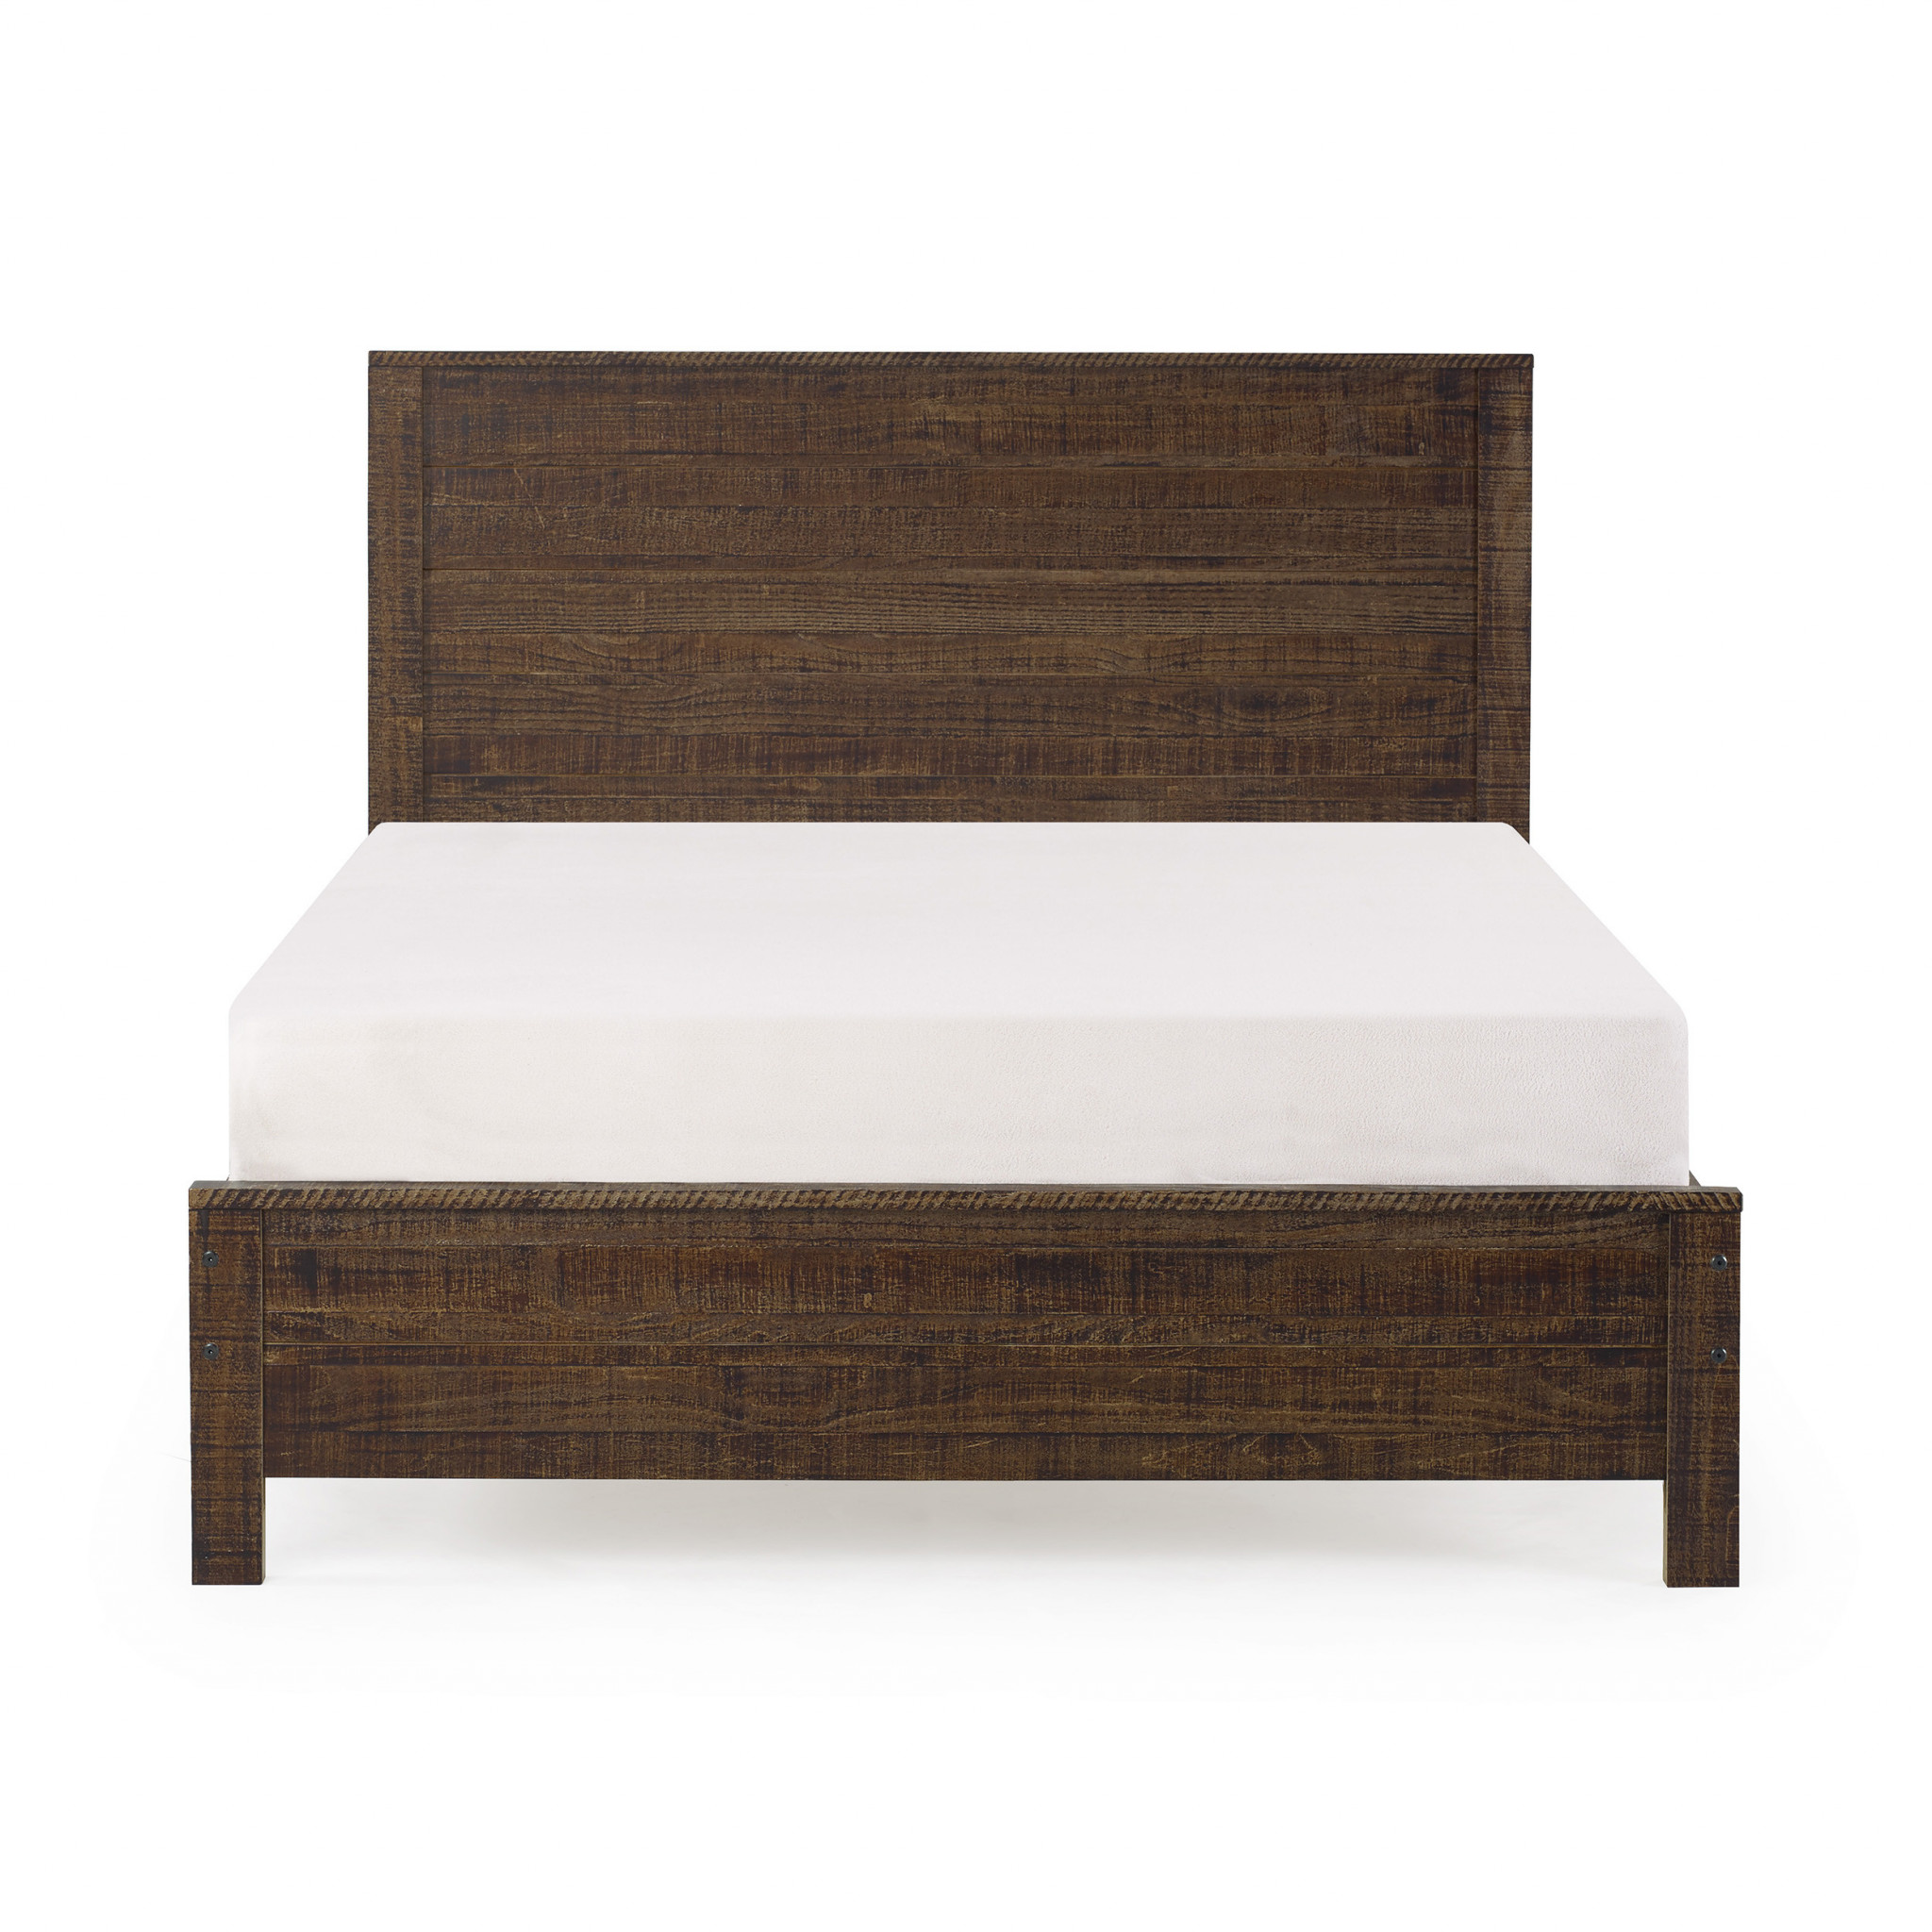 Dark Brown Solid Wood Full Double Bed Frame-490282-1